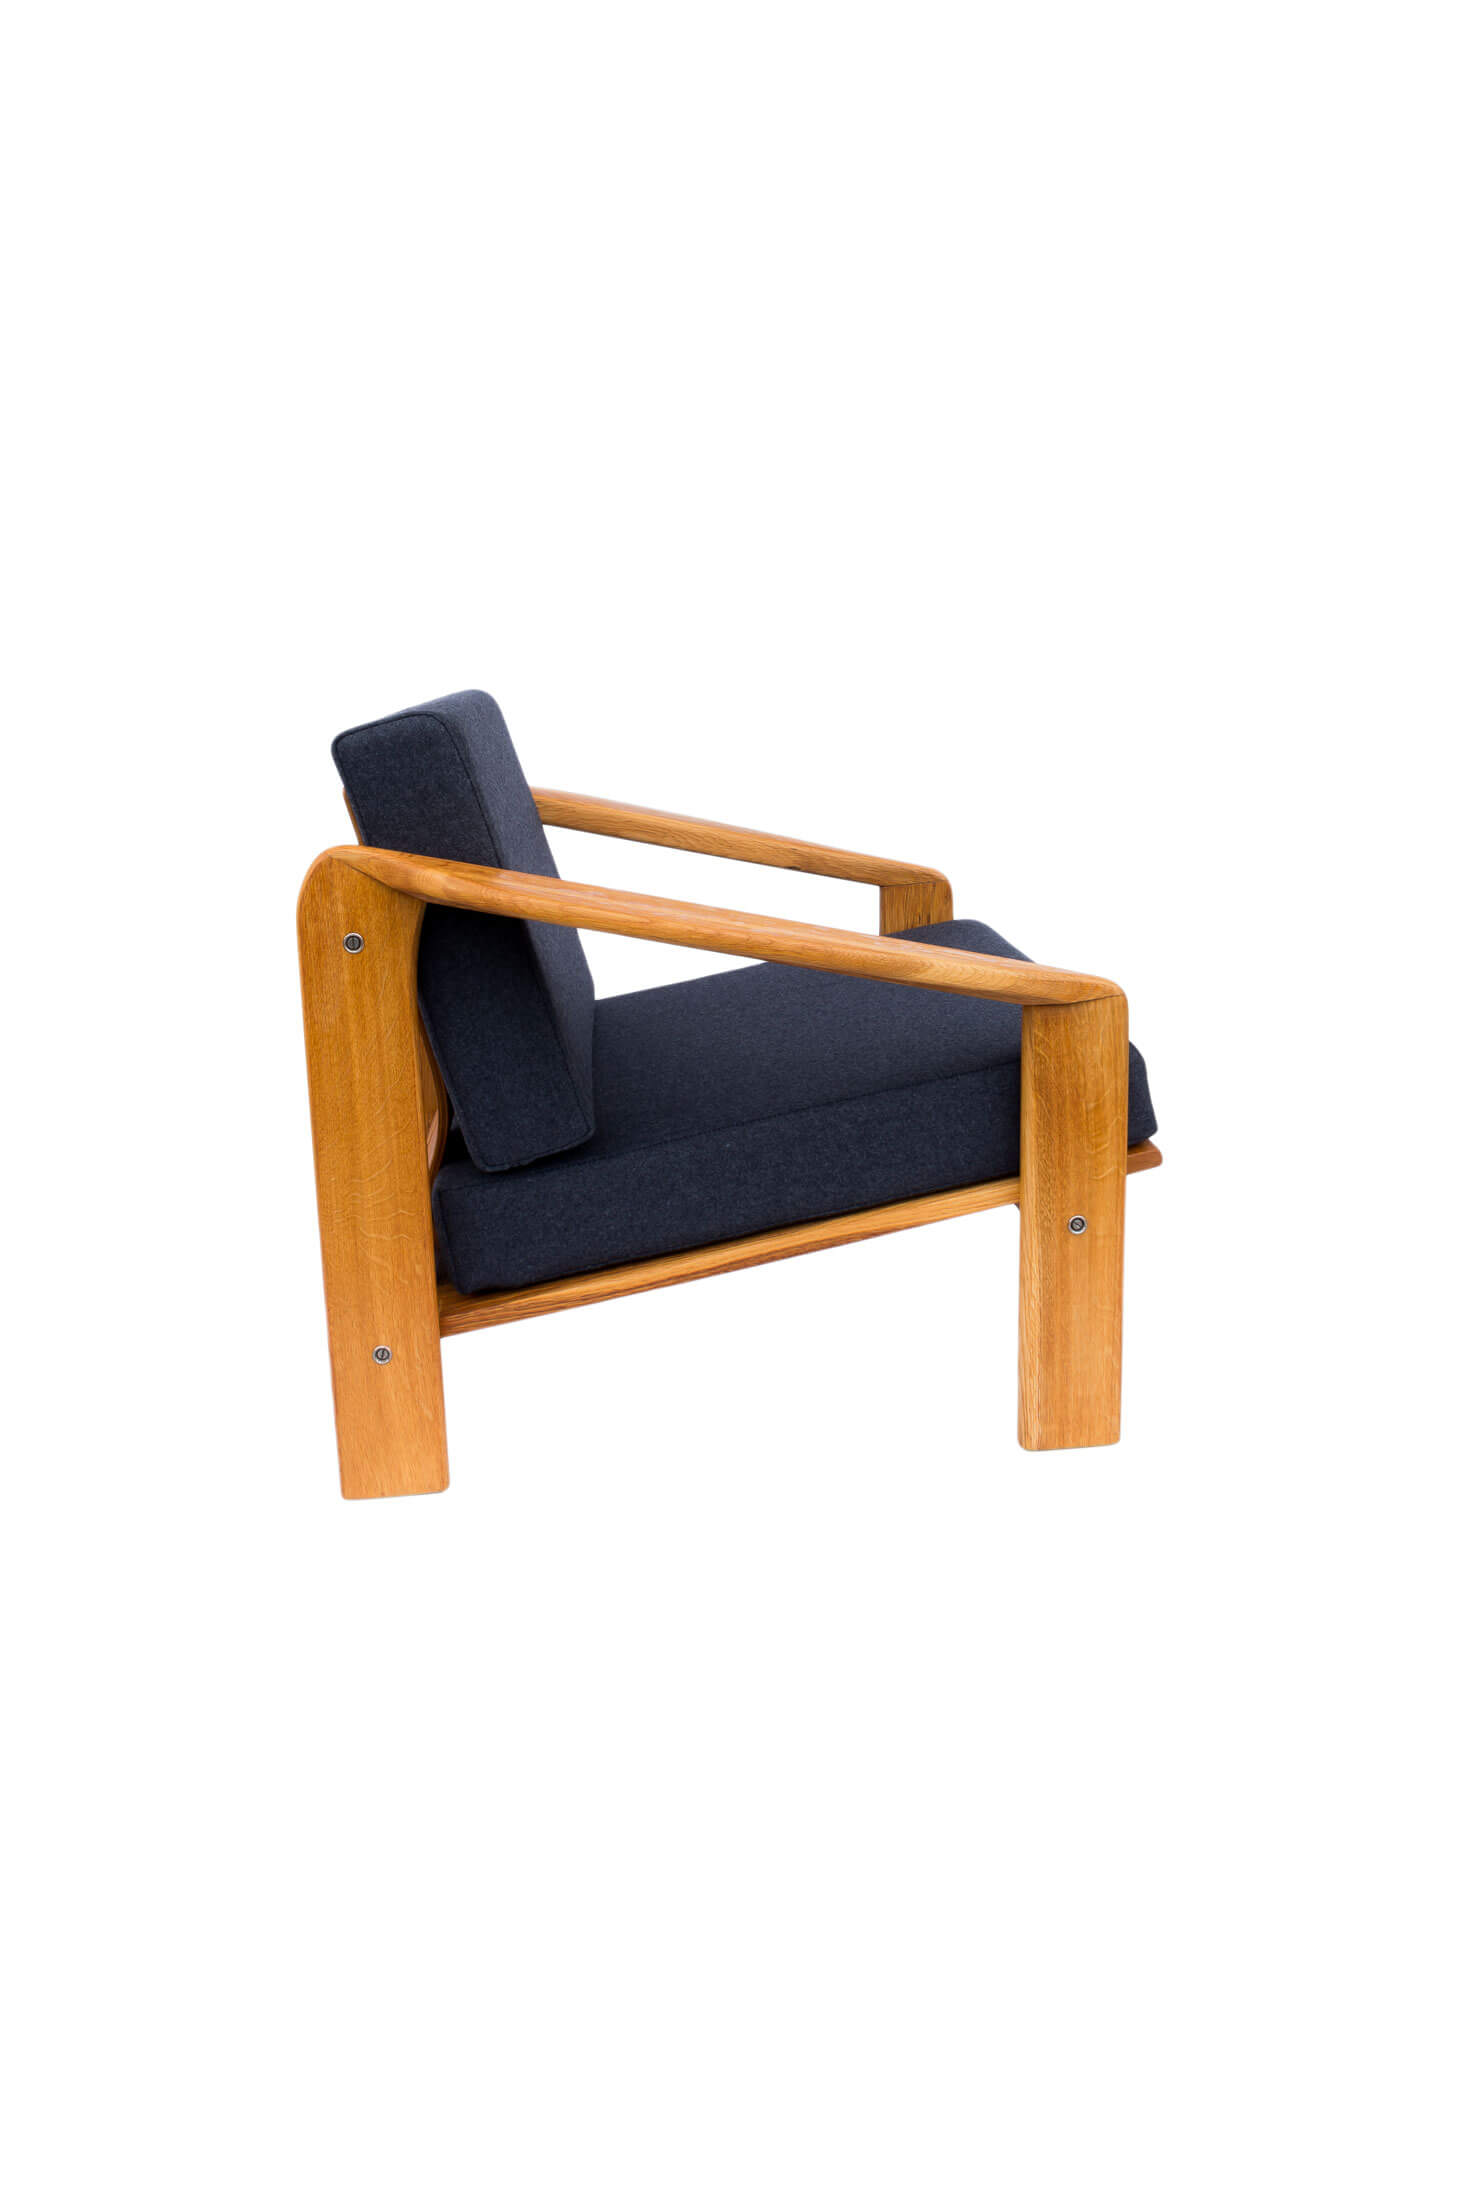 Armchair-oak designed by Z.Bączyk for ŁAD Cooperative